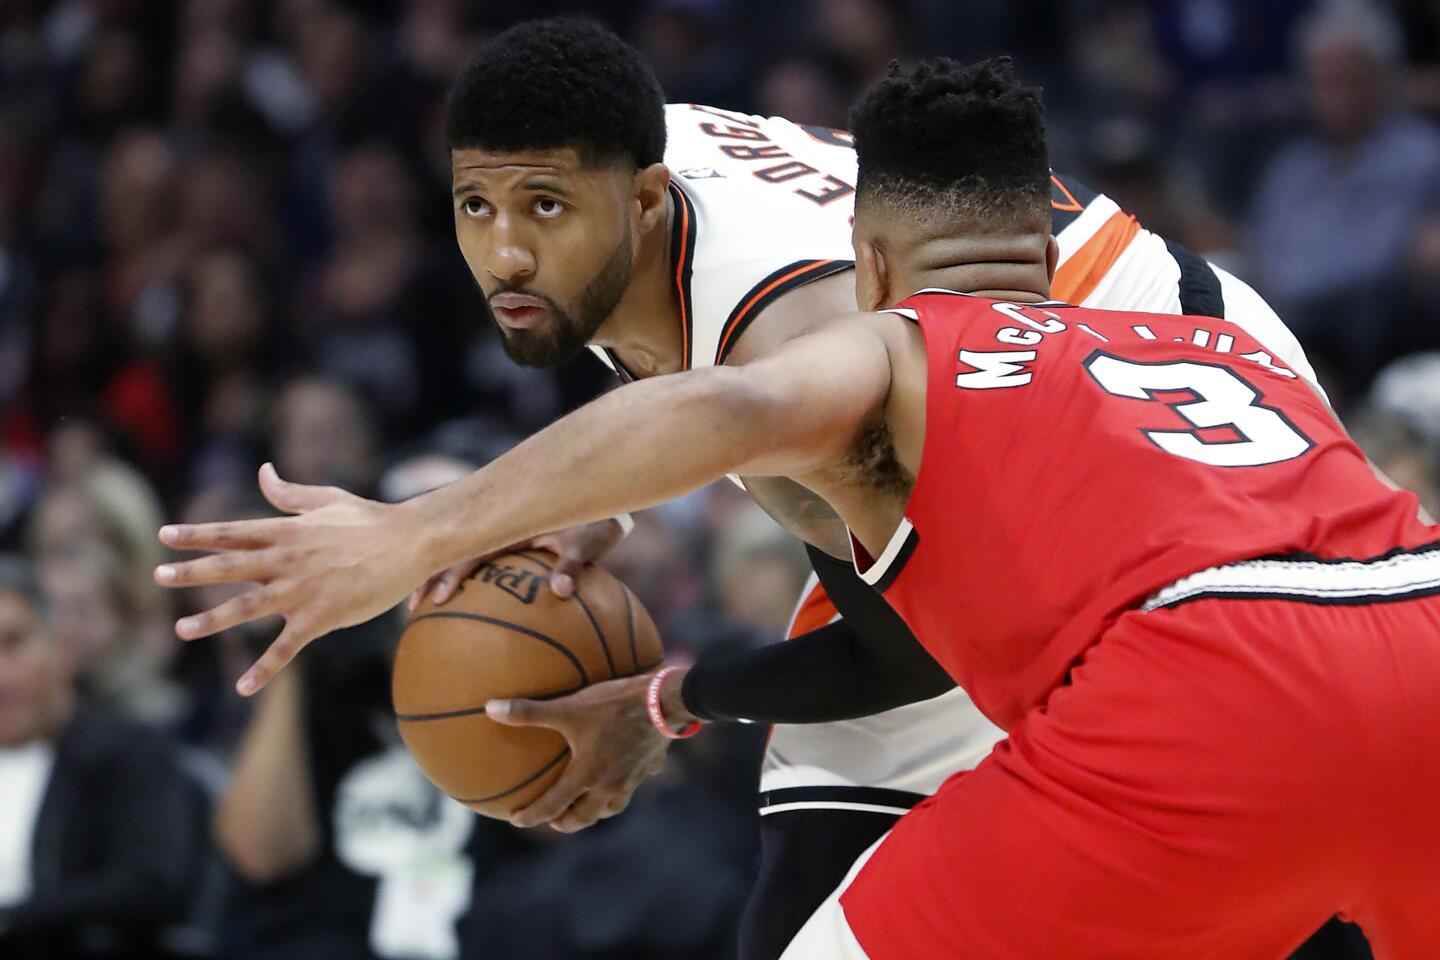 Clippers forward Paul George looks for an opening to the basket against Portland Trail Blazers guard CJ McCollum (3) in the first quarter at Staples Center on Tuesday.